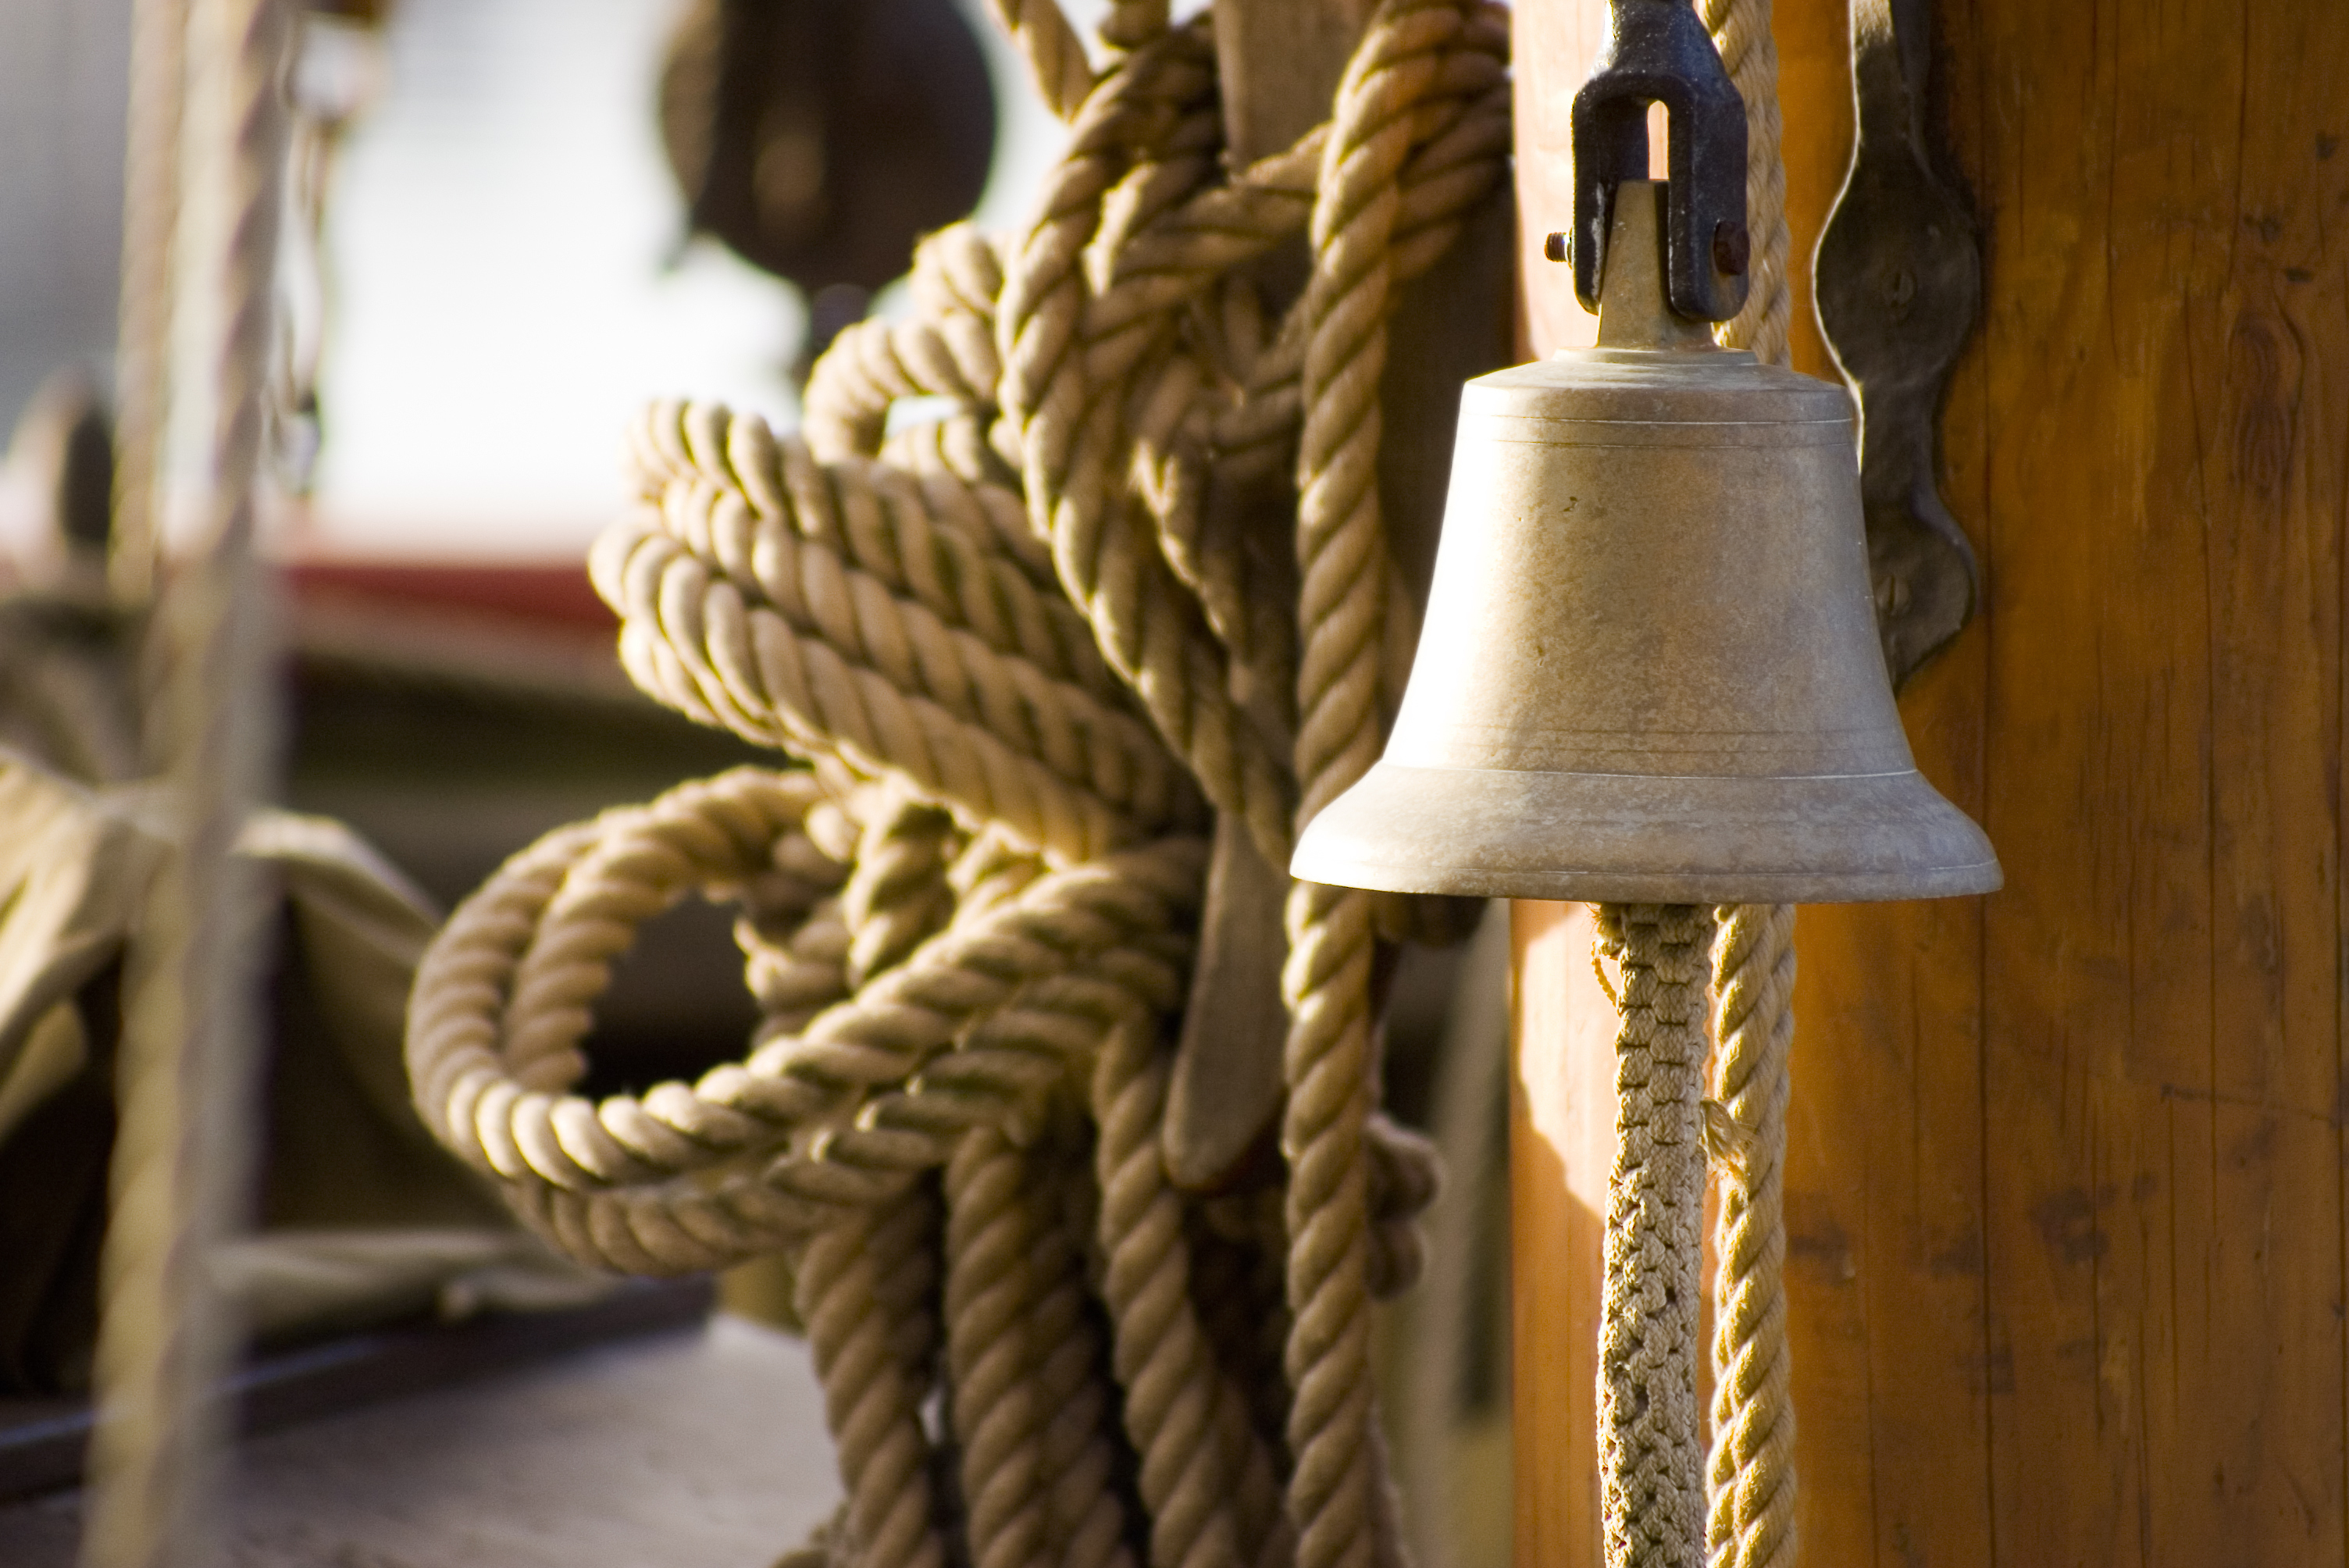 Ship&#x27;s bell attached to a wooden surface with coiled ropes on the sides